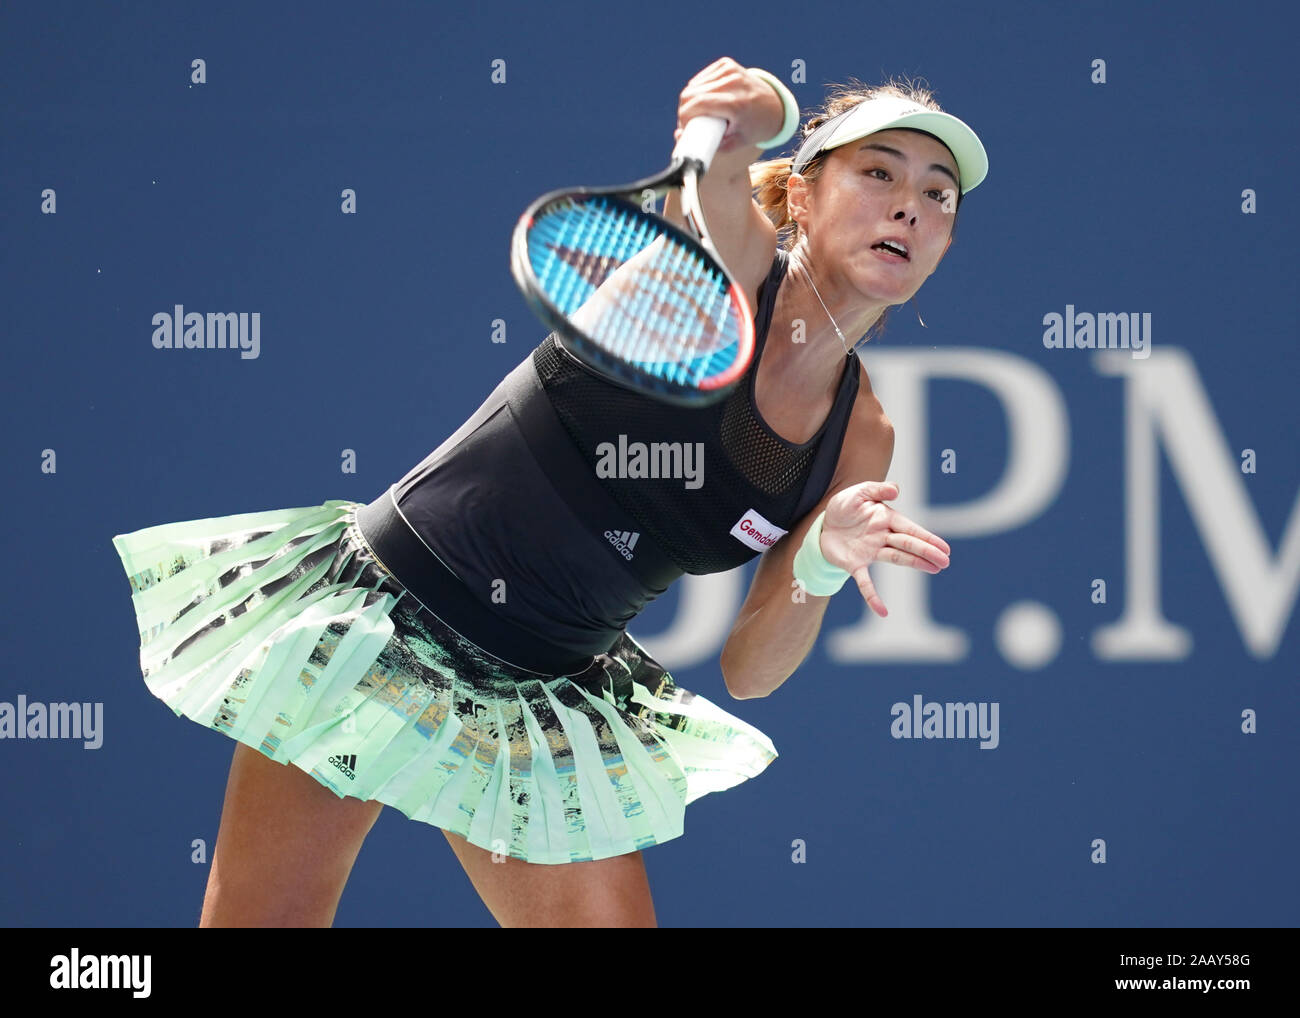 Chinese tennis player Qiang Wang serving during 2019 US Open tennis tournament, New York City, New York State, USA Stock Photo